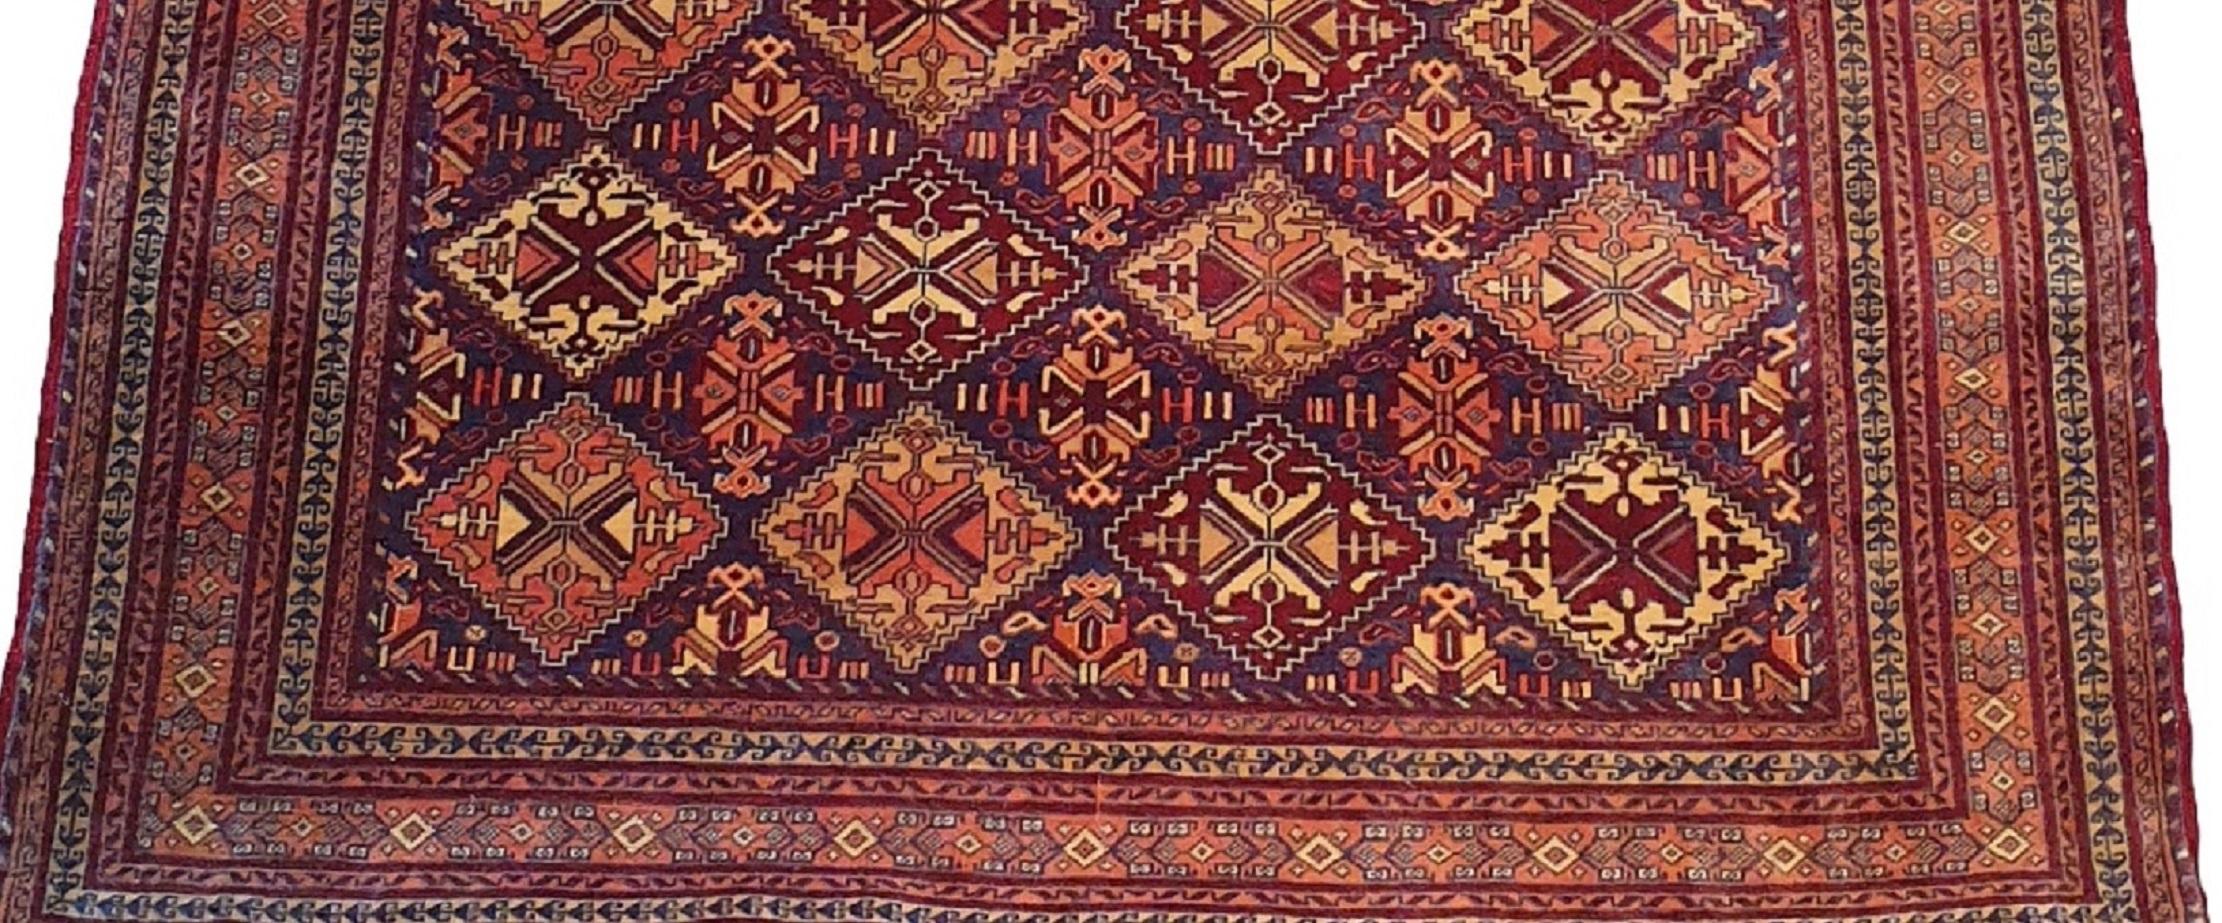 Mid-20th Century 739 - Beautiful Turkmen Bukhara Carpet from the 20th Century For Sale